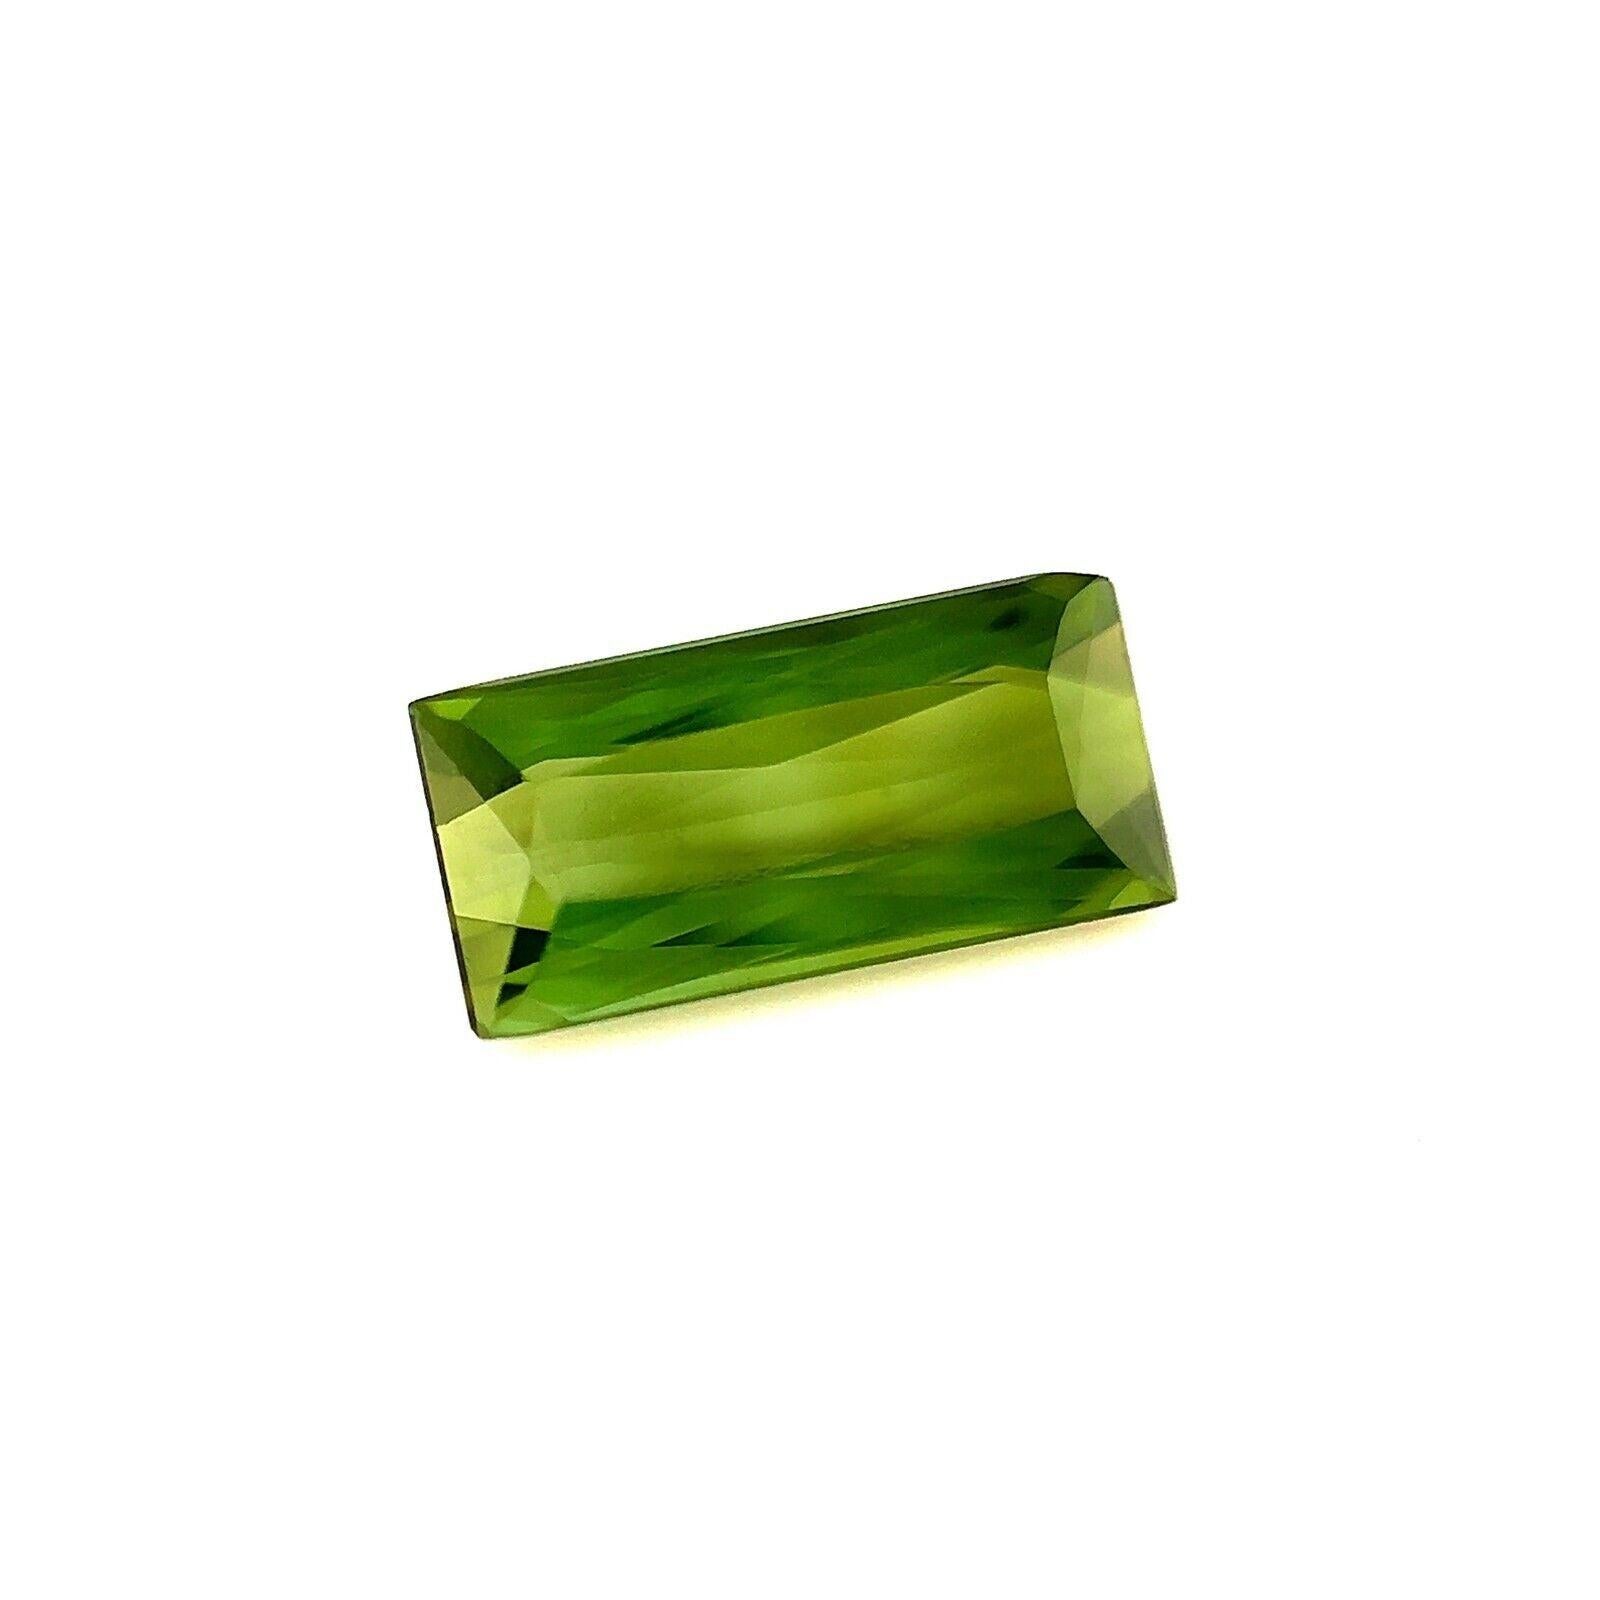 1.46ct Vivid Green Tourmaline Fancy Octagon Scissor Emerald Cut Gem 10.2x5mm VS

Natural Vivid Green Tourmaline Gemstone.
1.46 Carat with a beautiful vivid green colour and very good clarity, VS.
Some small natural inclusions visible when looking